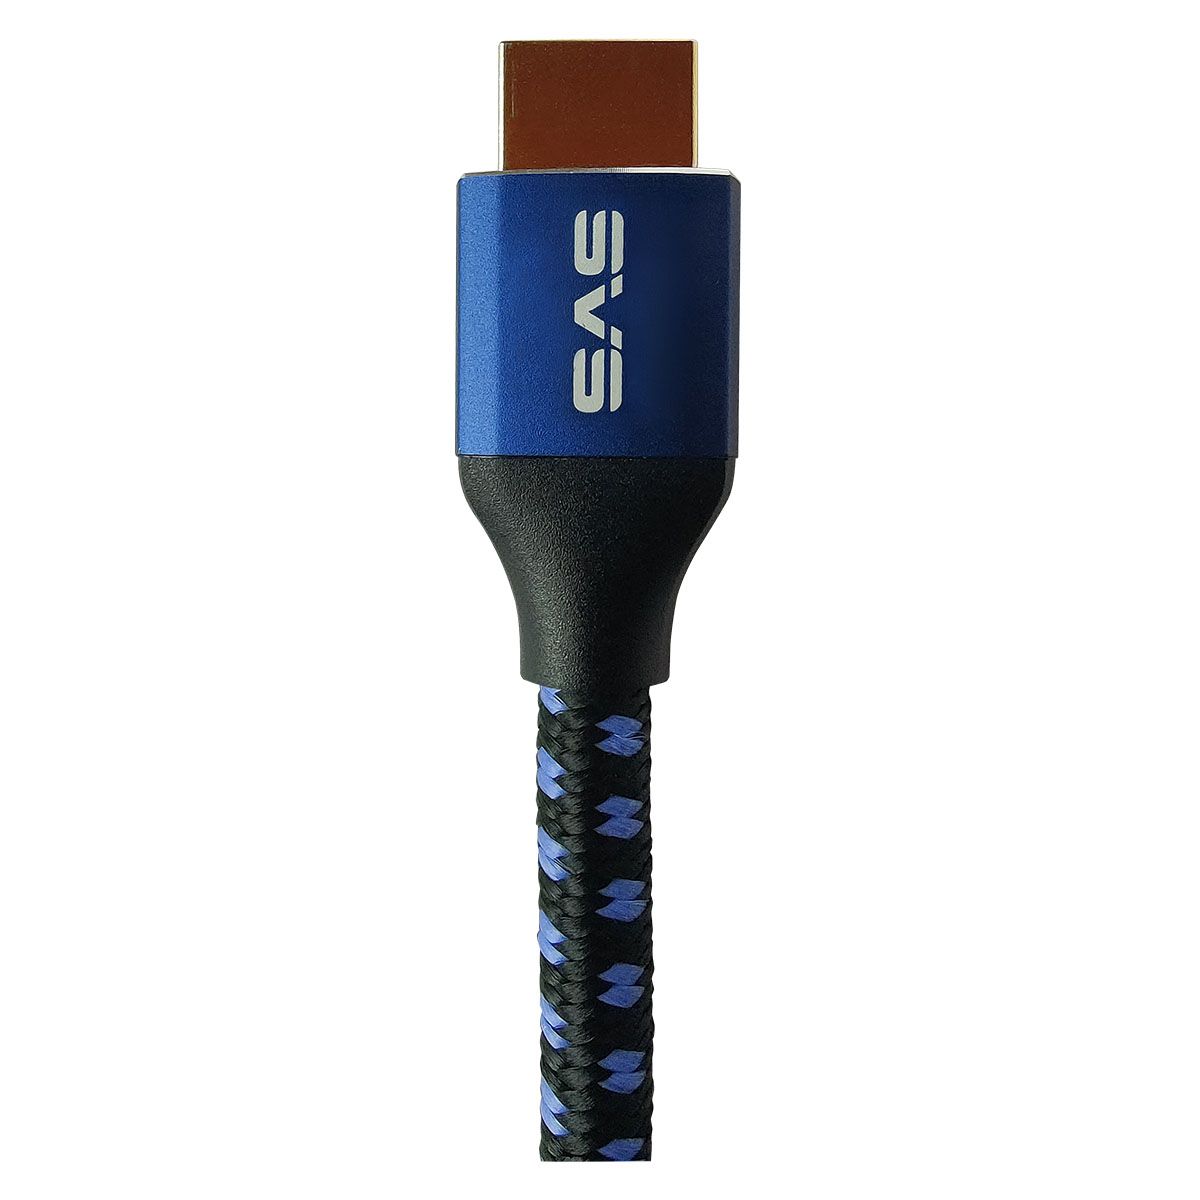 SVS SoundPath Ultra HDMI Cable - showing logo